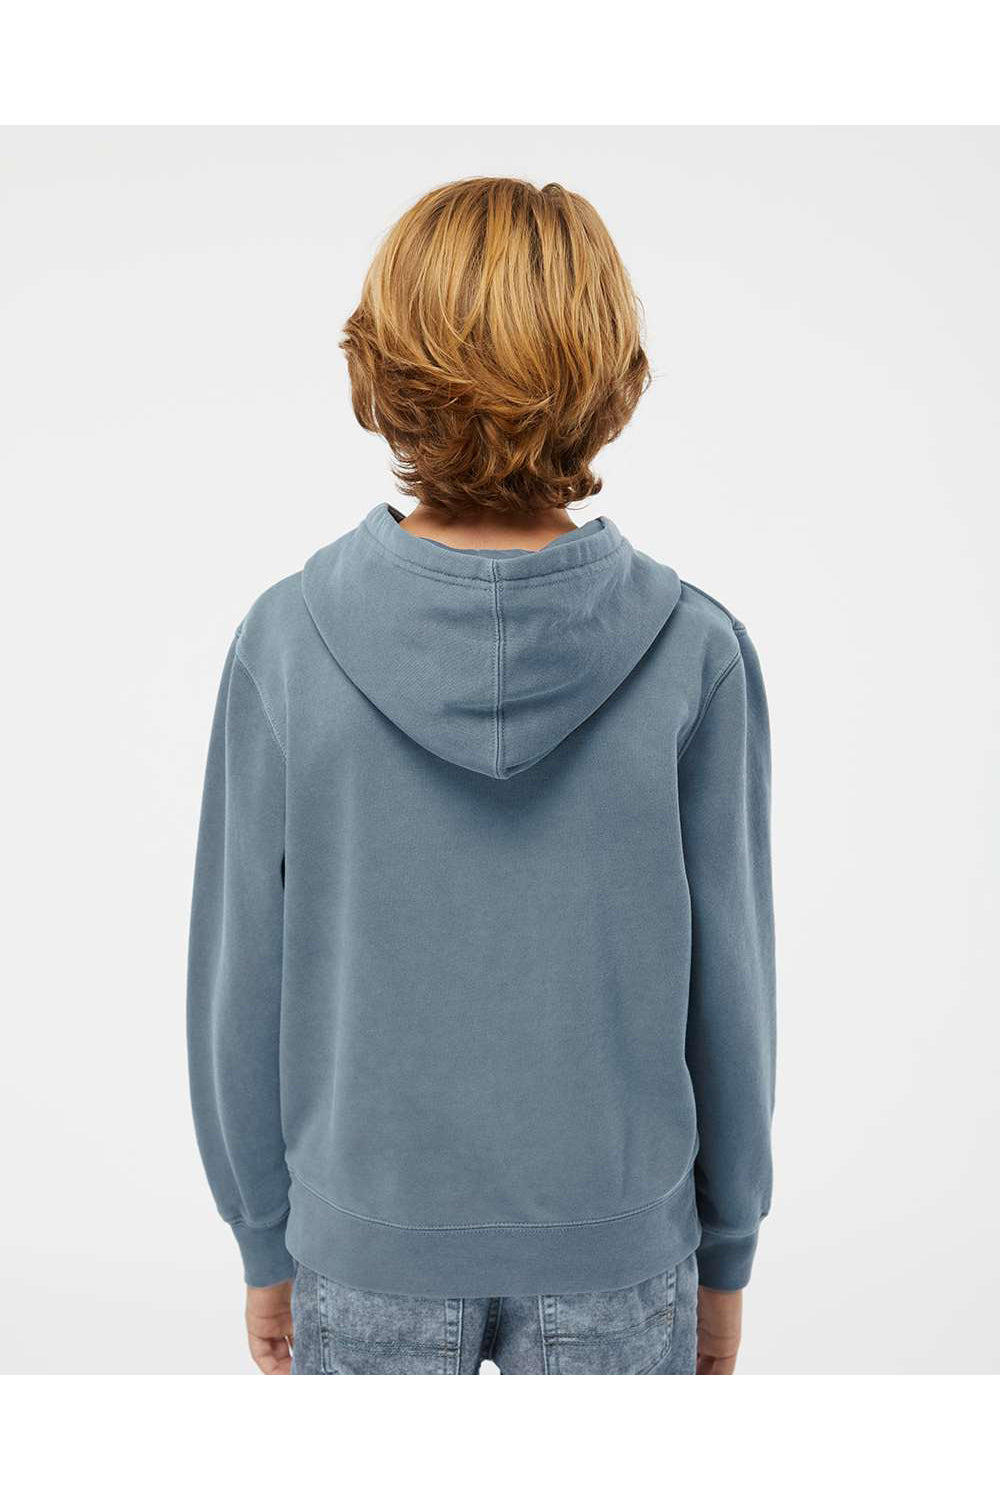 Independent Trading Co. PRM1500Y Youth Pigment Dyed Hooded Sweatshirt Hoodie Slate Blue Model Back